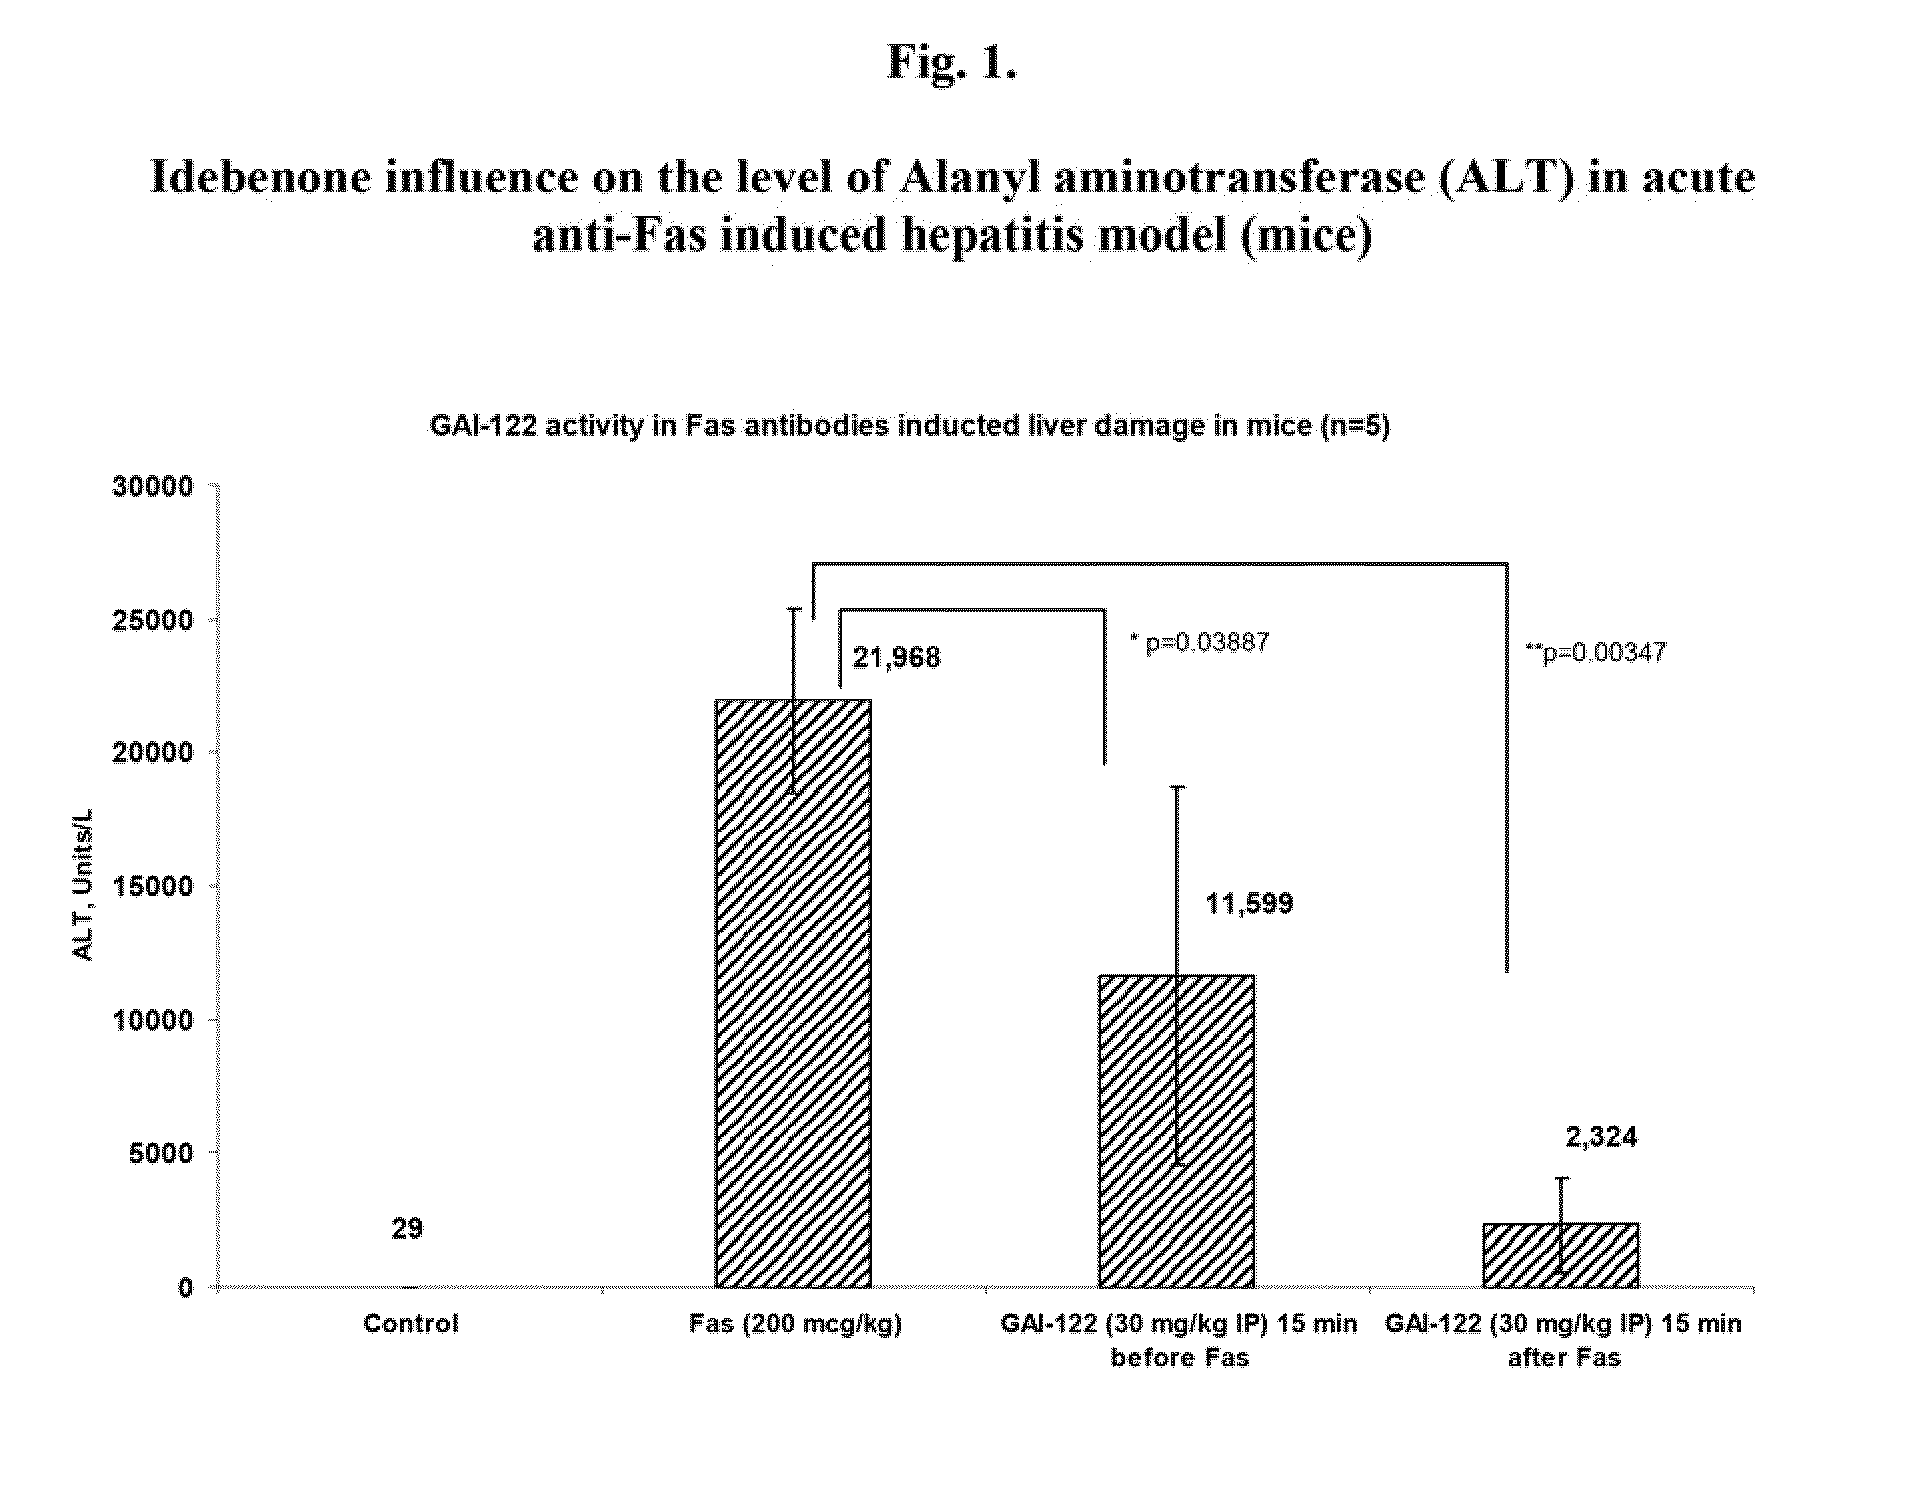 Pharmaceutical composition containing idebenone for the treatment of liver disorders